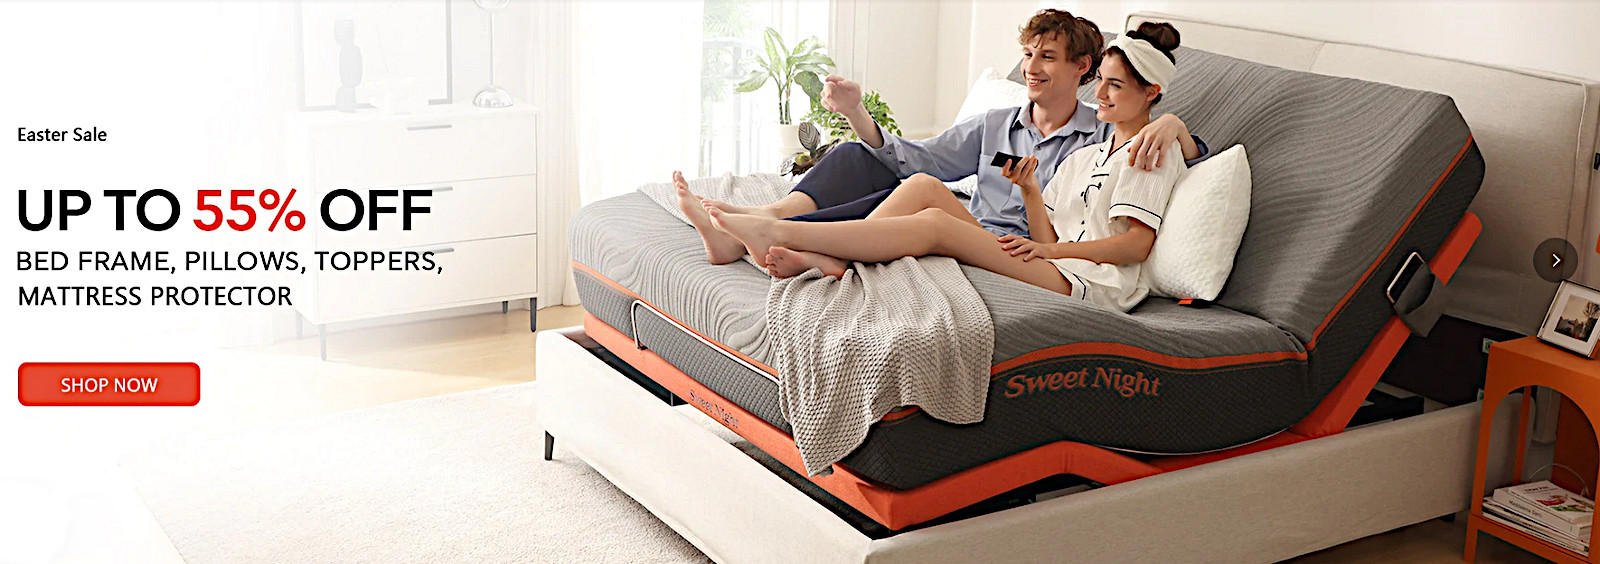 Low-priced bed frame pillow topper mattress protector